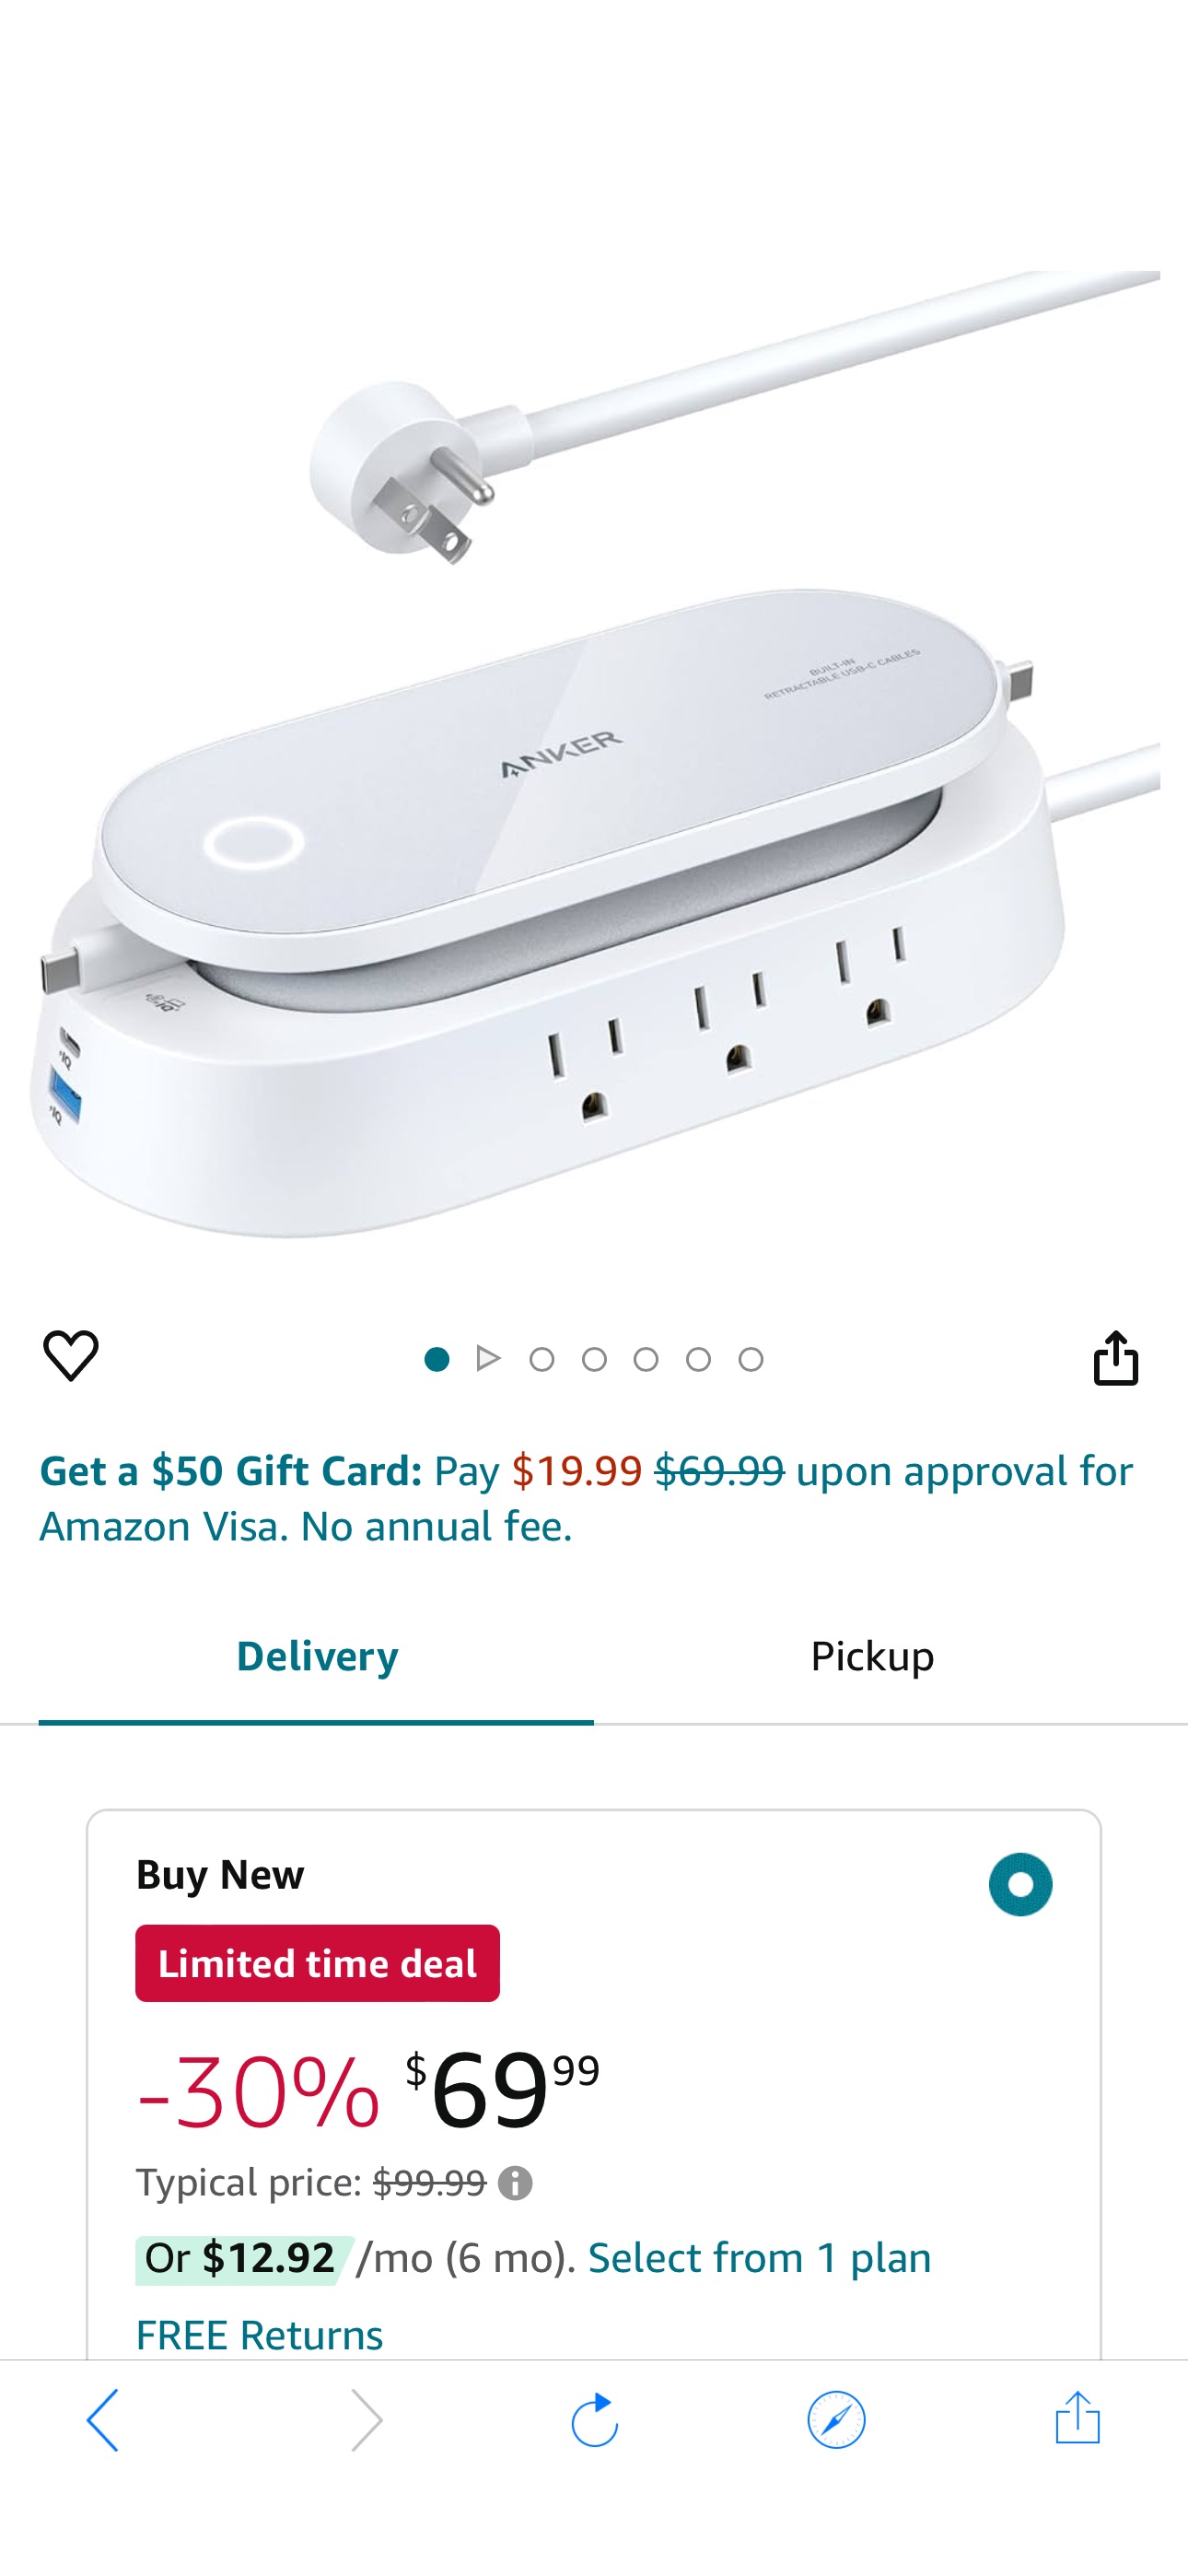 Amazon.com: Anker 647 Charging Station (100W), 10-in-1 Power Strip with 6 AC, 1 USB-A, 1 USB-C, 2 Retractable USB C Cables (3ft), 5ft Extension Cord,Power Delivery for Conference Rooms, Desktop Access